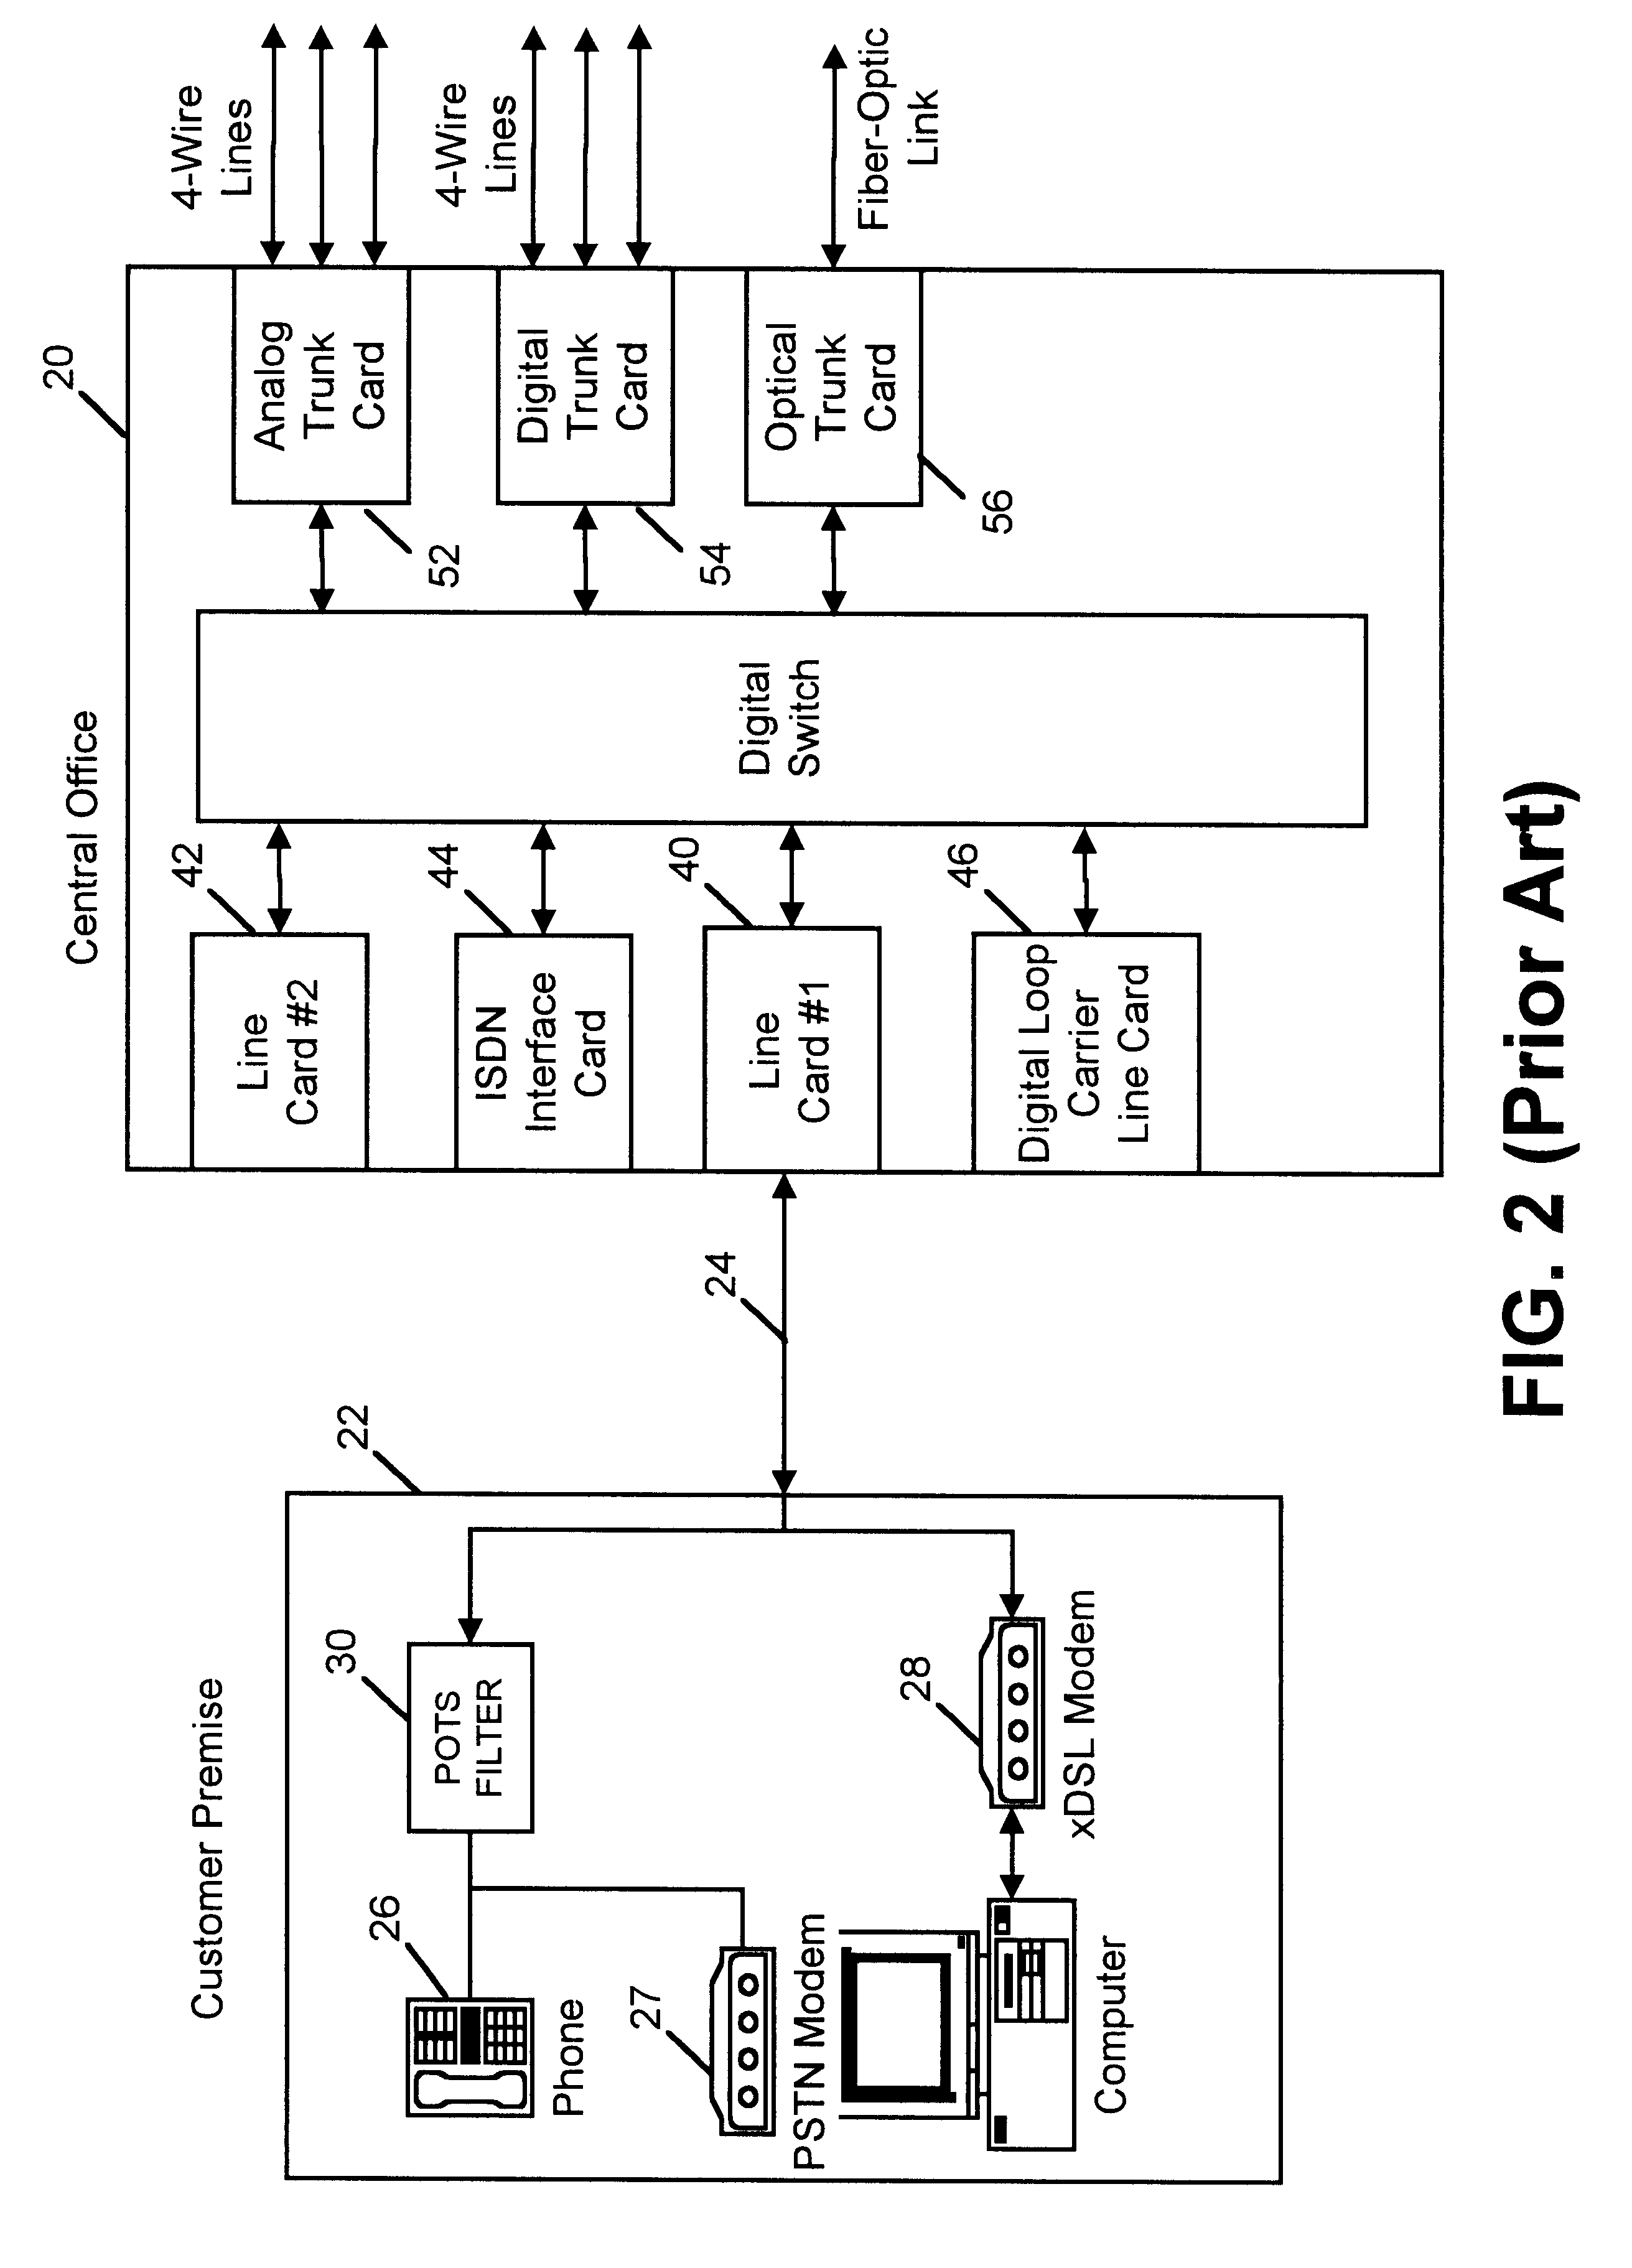 Apparatus for facilitating combined POTS and xDSL services at a customer premises